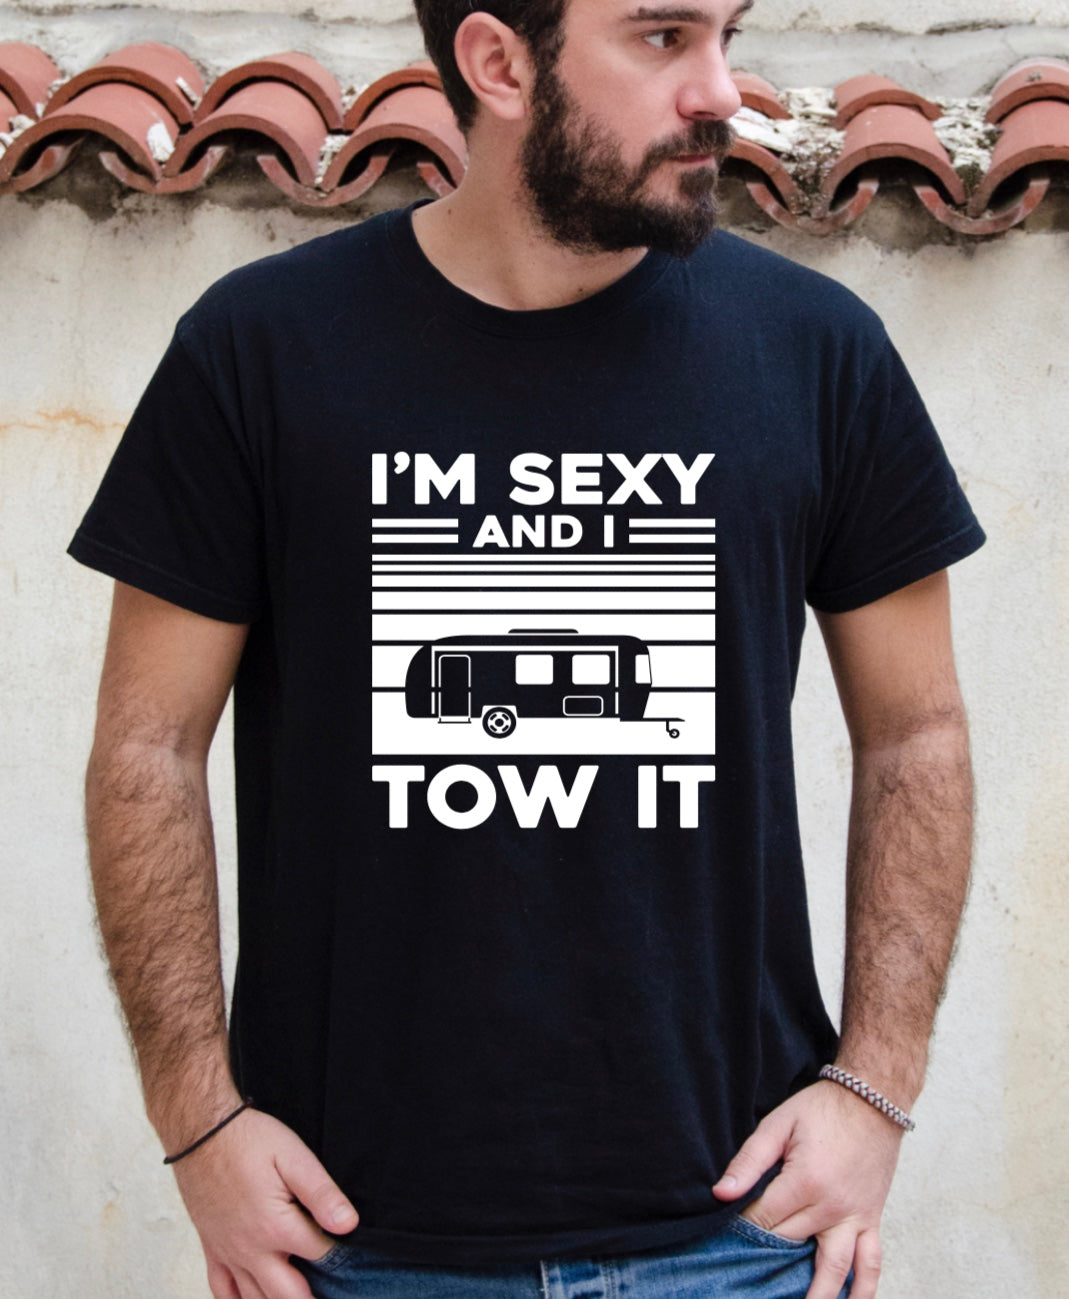 I’m sexy and I tow it t-shirt 